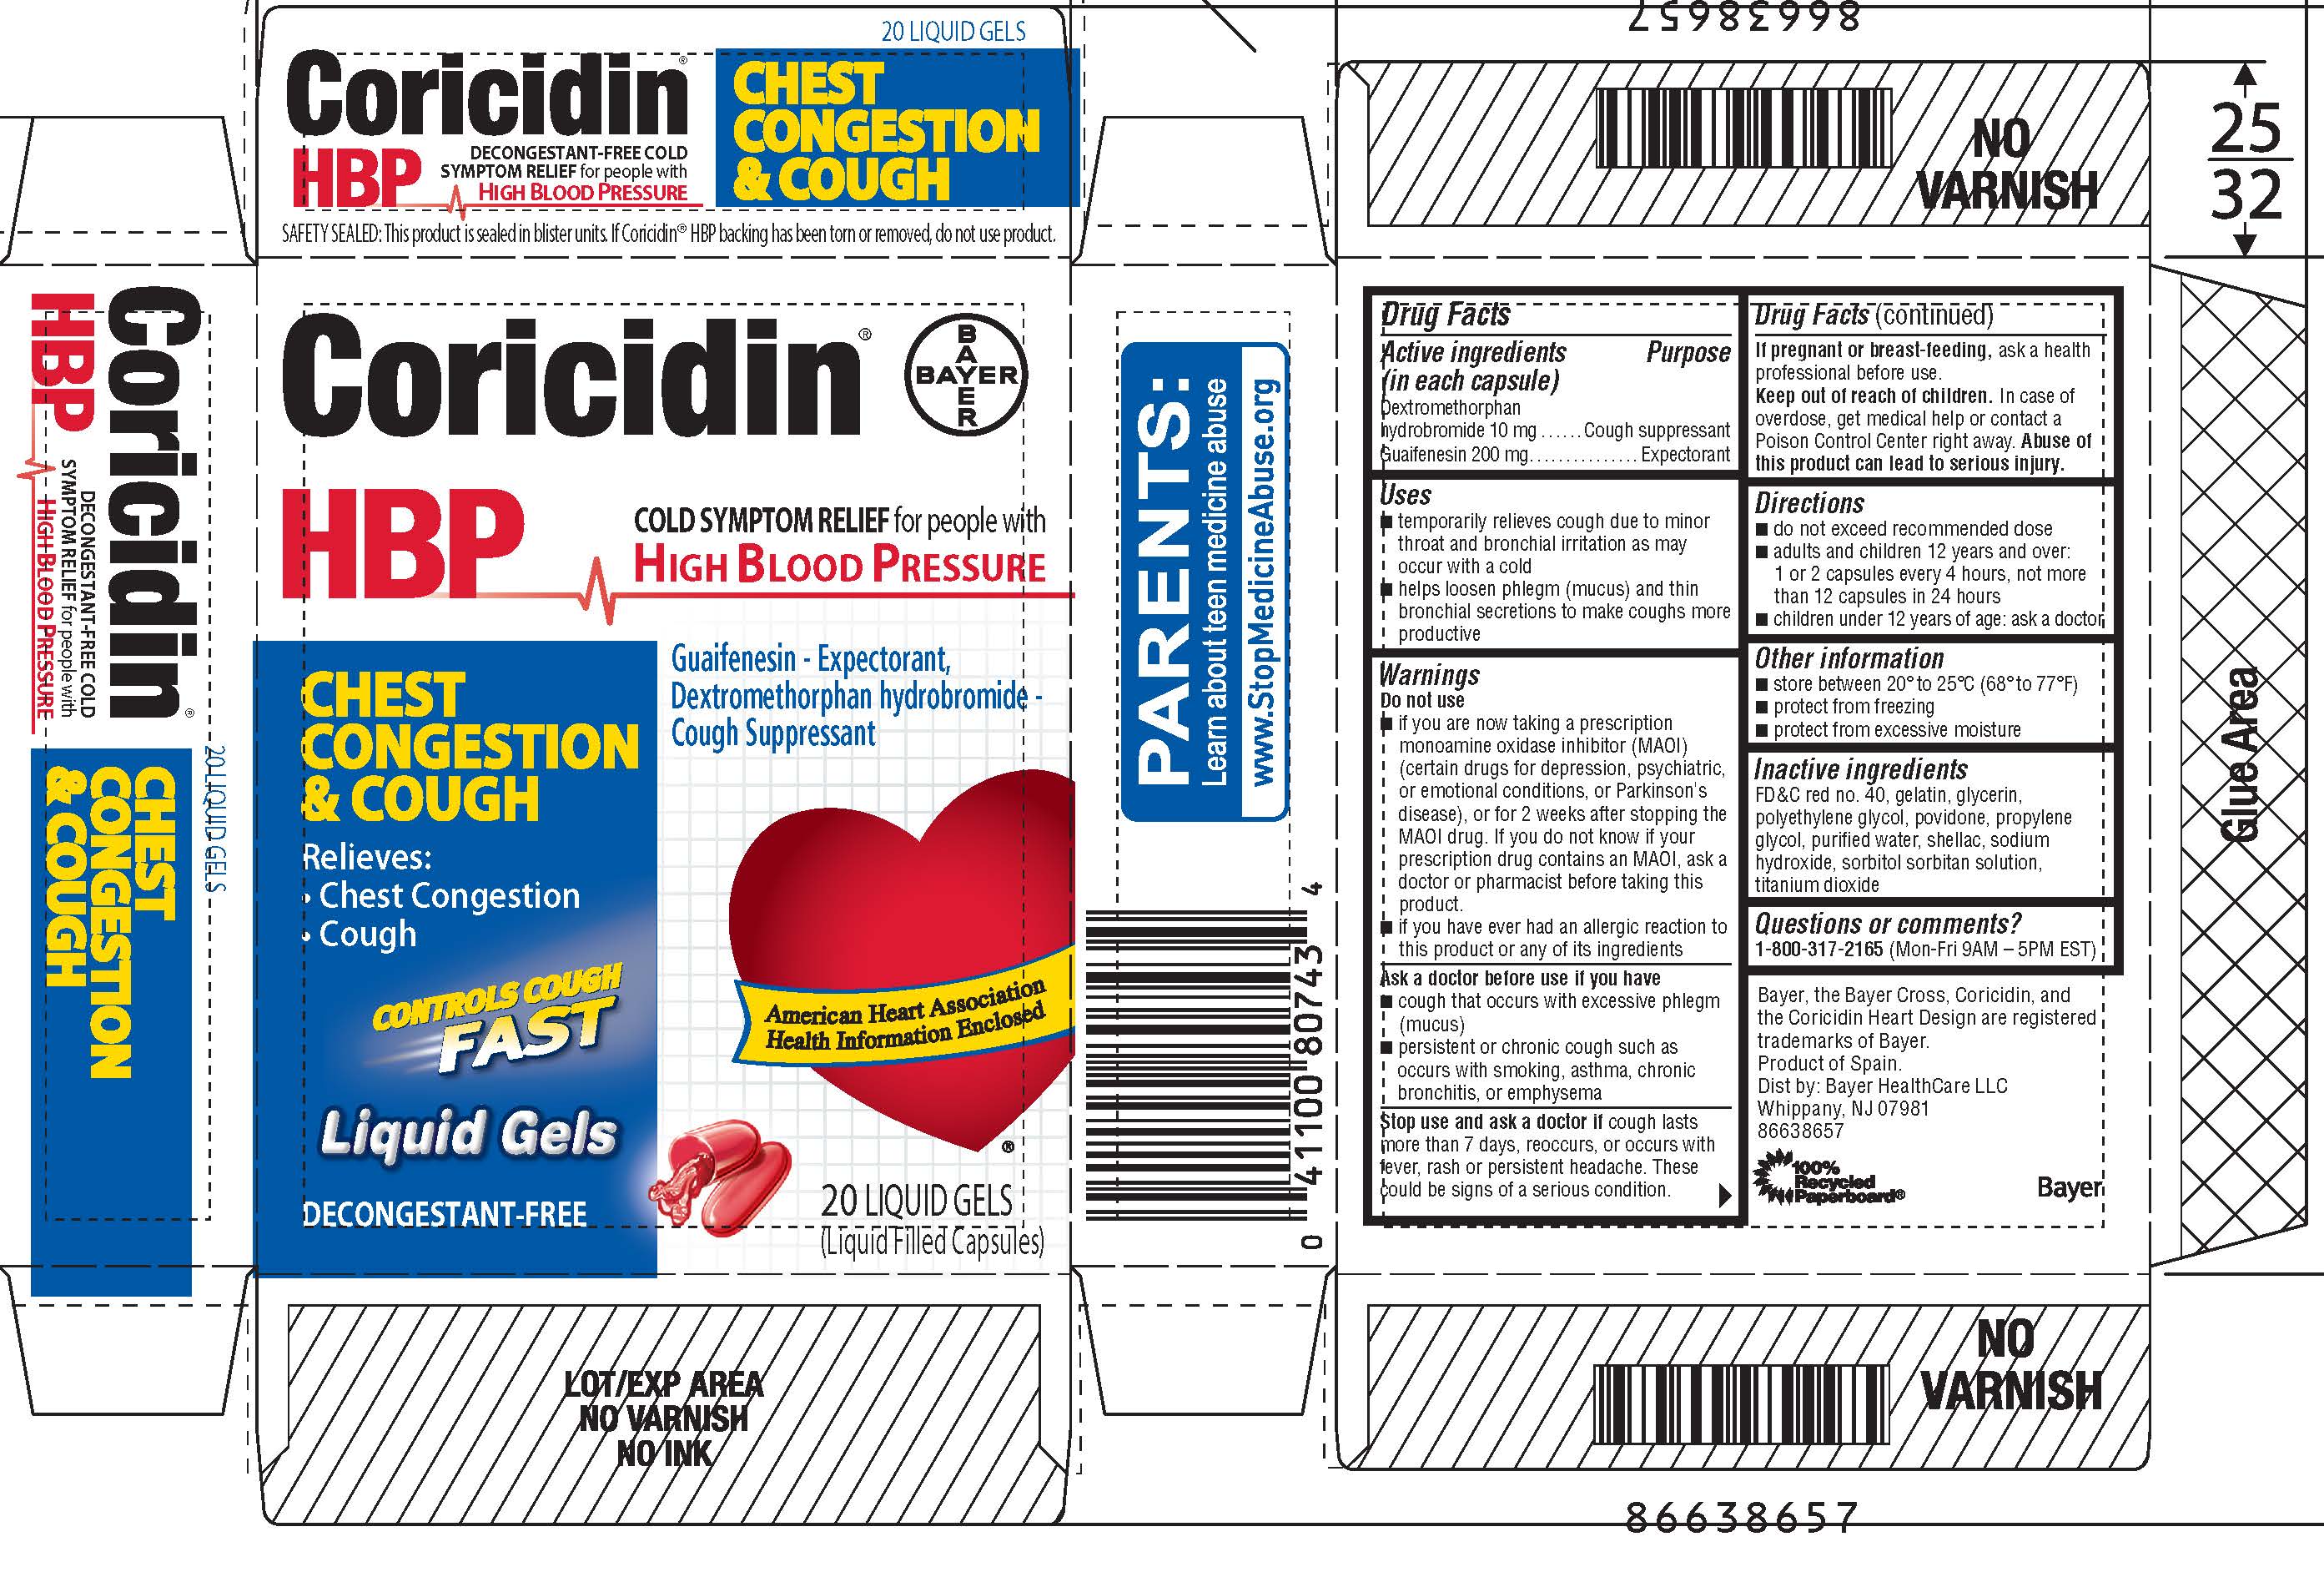 Coricidin Hbp Chest Congestion And Cough Capsule Gelatin Coated Bayer Healthcare Llc 8147